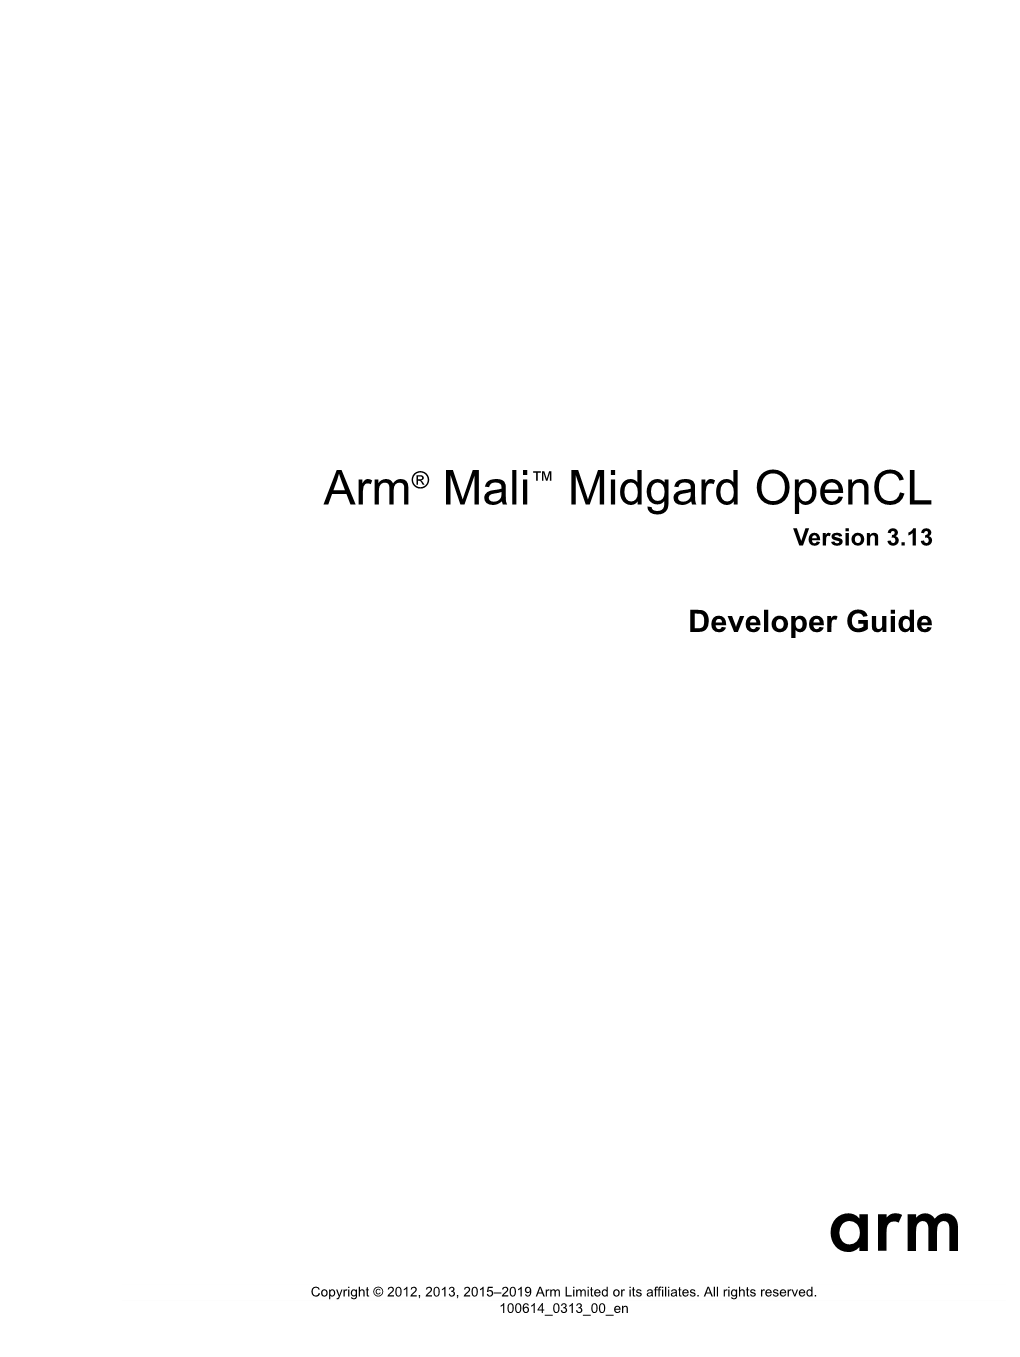 Arm® Mali™ Midgard Opencl Developer Guide Copyright © 2012, 2013, 2015–2019 Arm Limited Or Its Affiliates